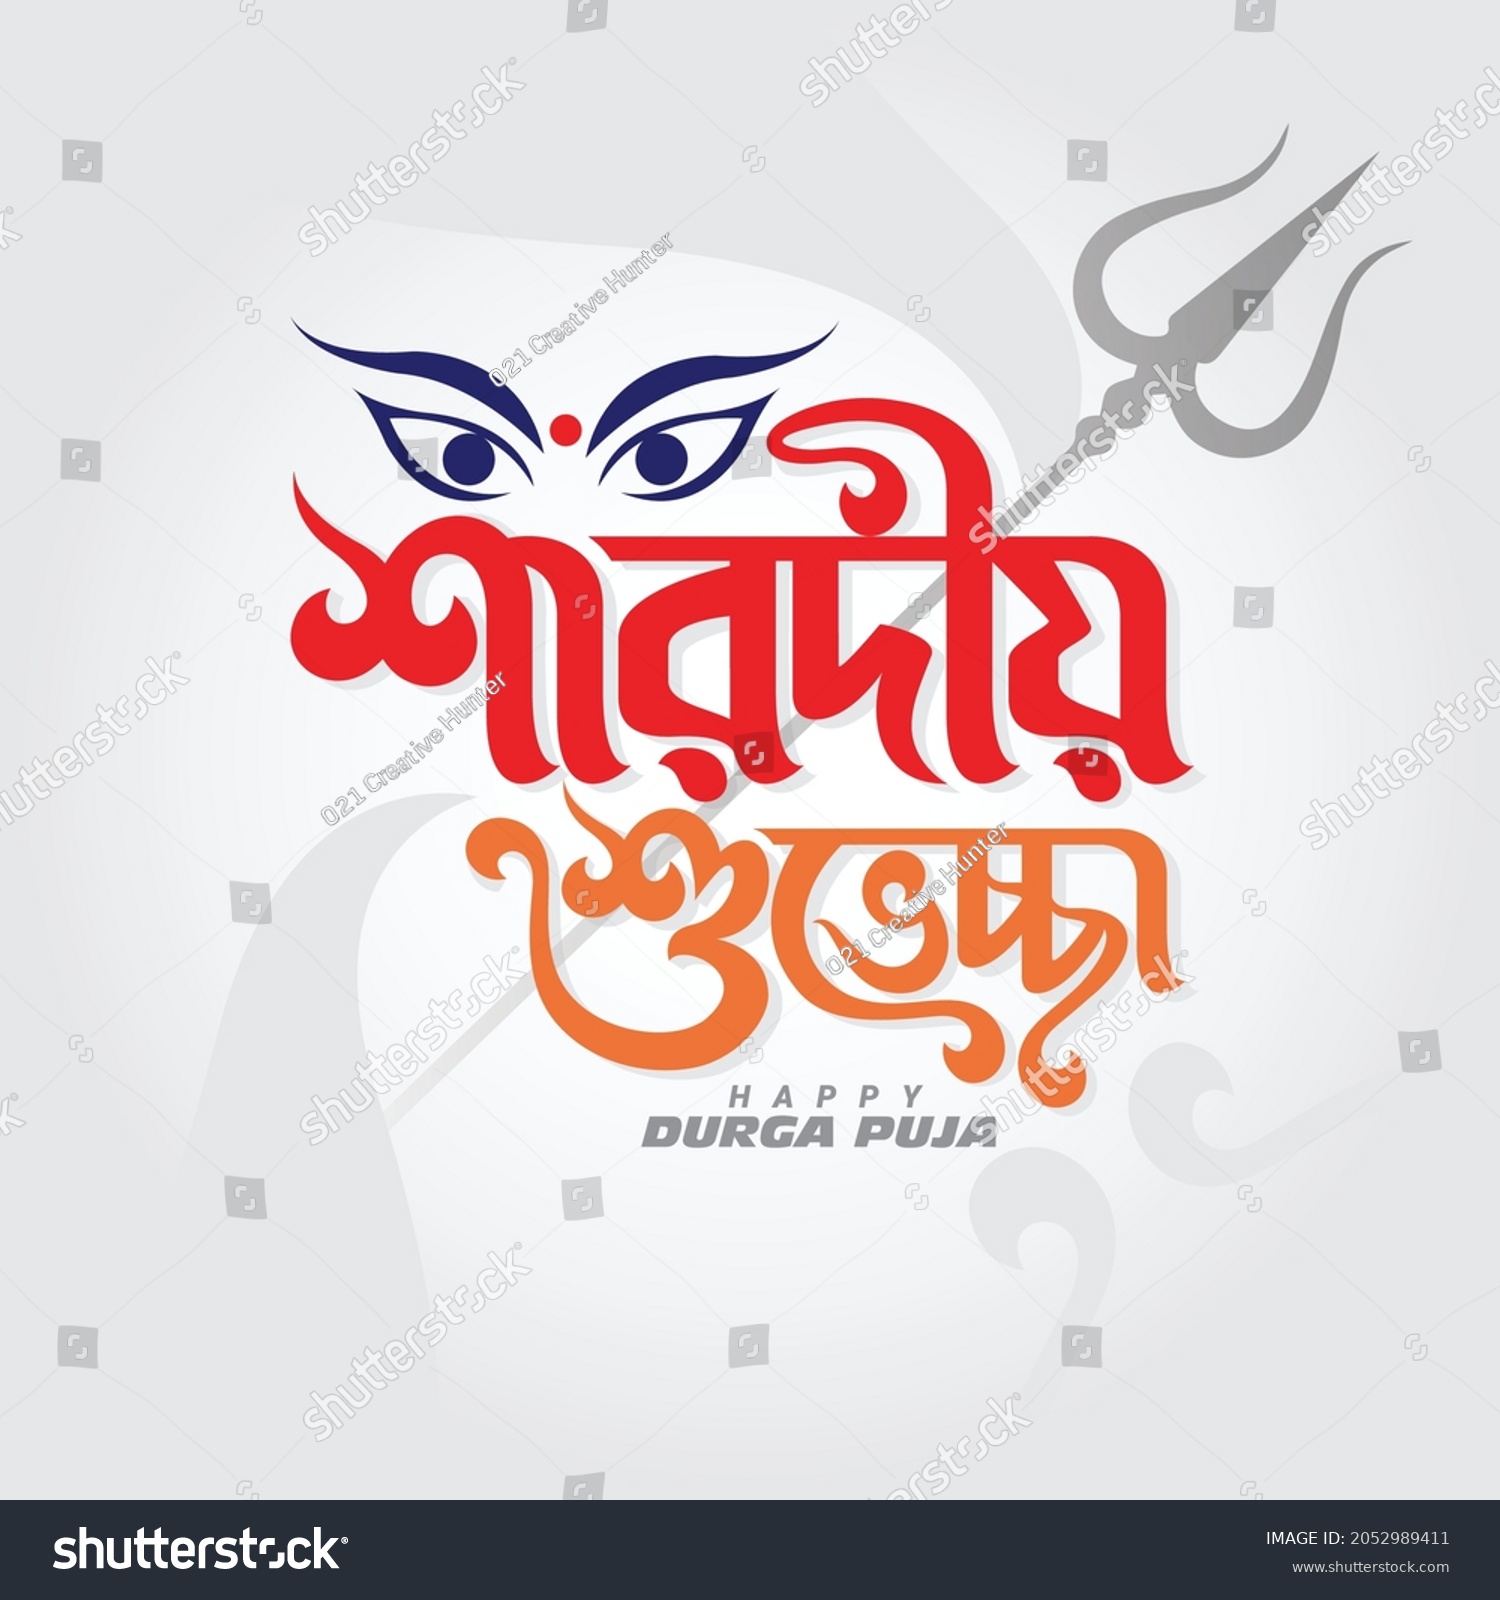 SVG of Happy Durga Puja greeting card Bangla typography. Durga Puja, also called Durgotsava, is an annual Hindu festival originating in the Indian subcontinent which reveres and pays the Hindu goddess Durga. svg